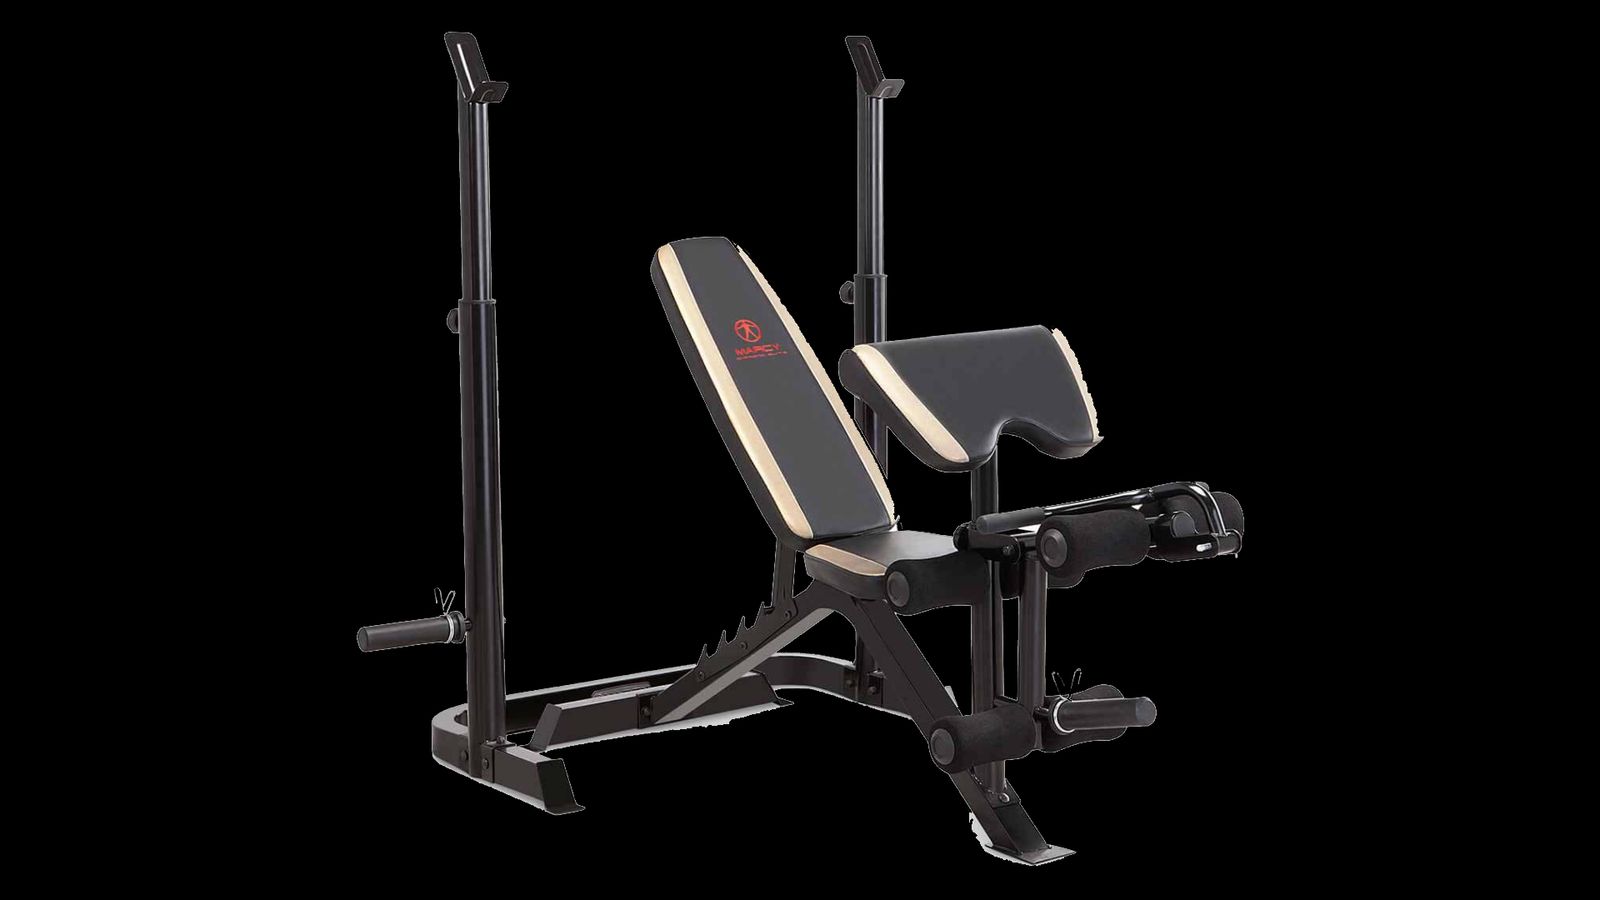 Marcy Adjustable Olympic Weight Bench product image of a black and light cream bench with a rack attached.